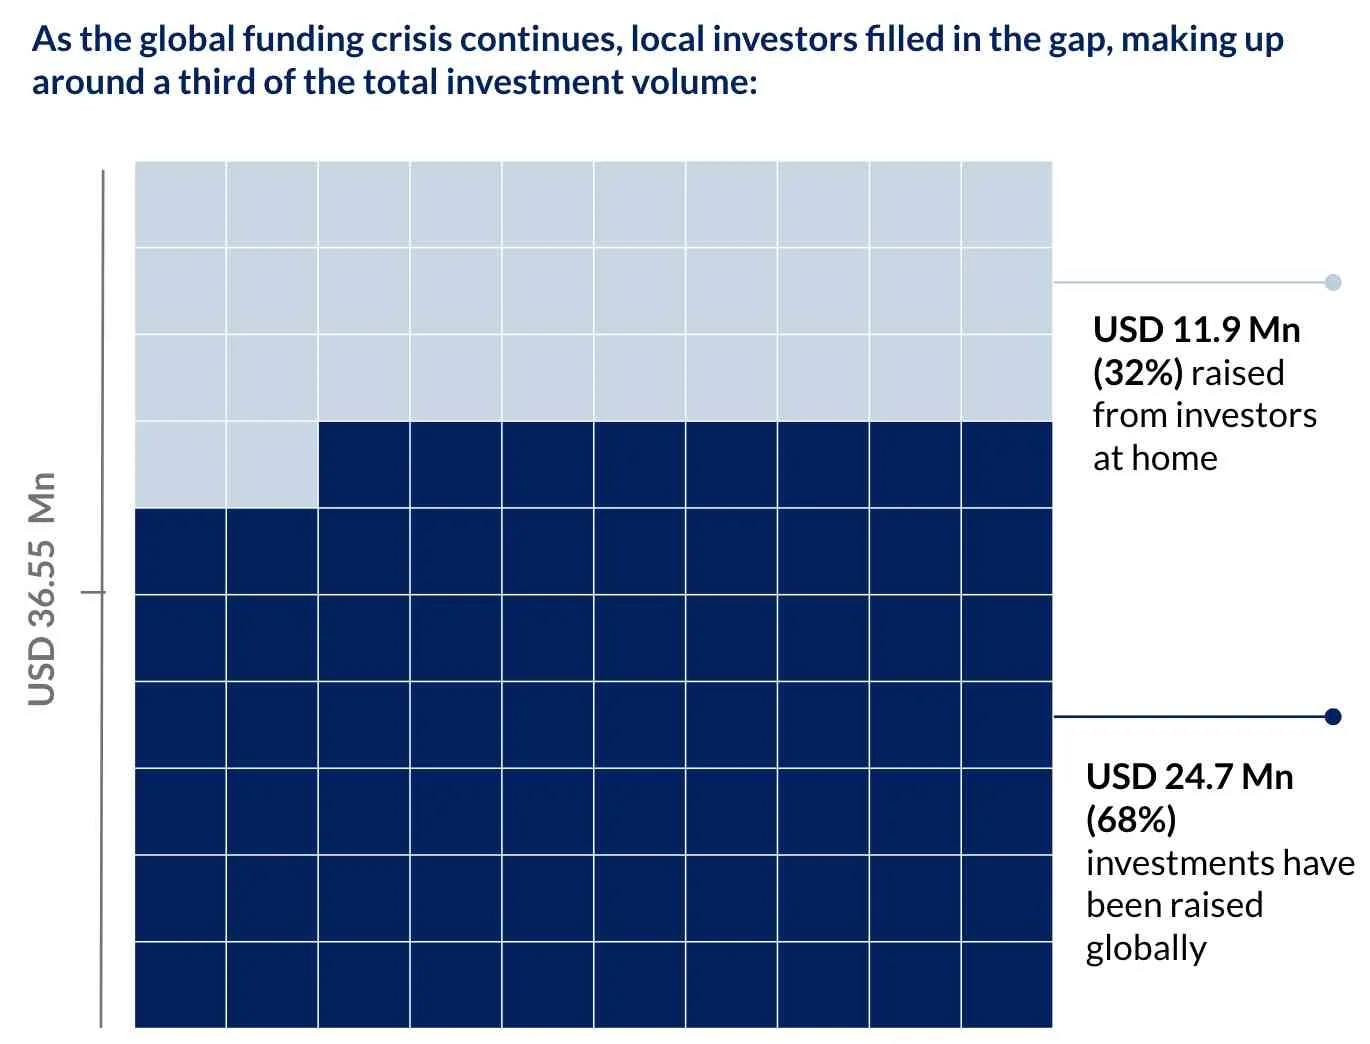 Local investors filled in the startup investment funding gap left by global investors 